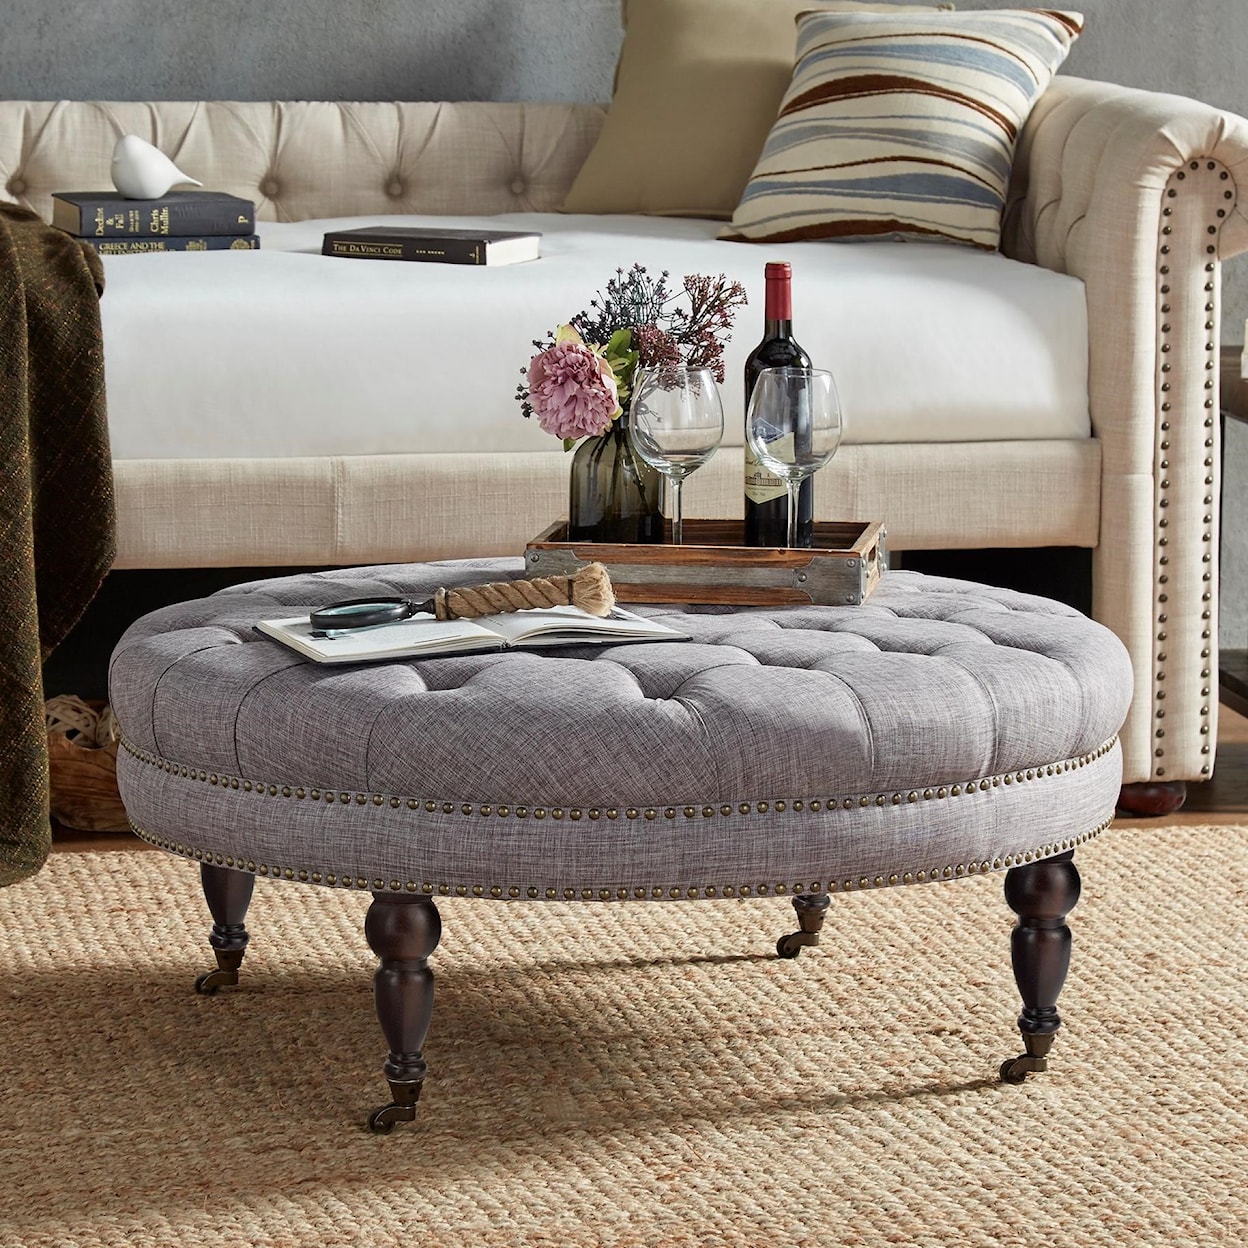 Homelegance  Round Tufted Bench Ottoman with Casters